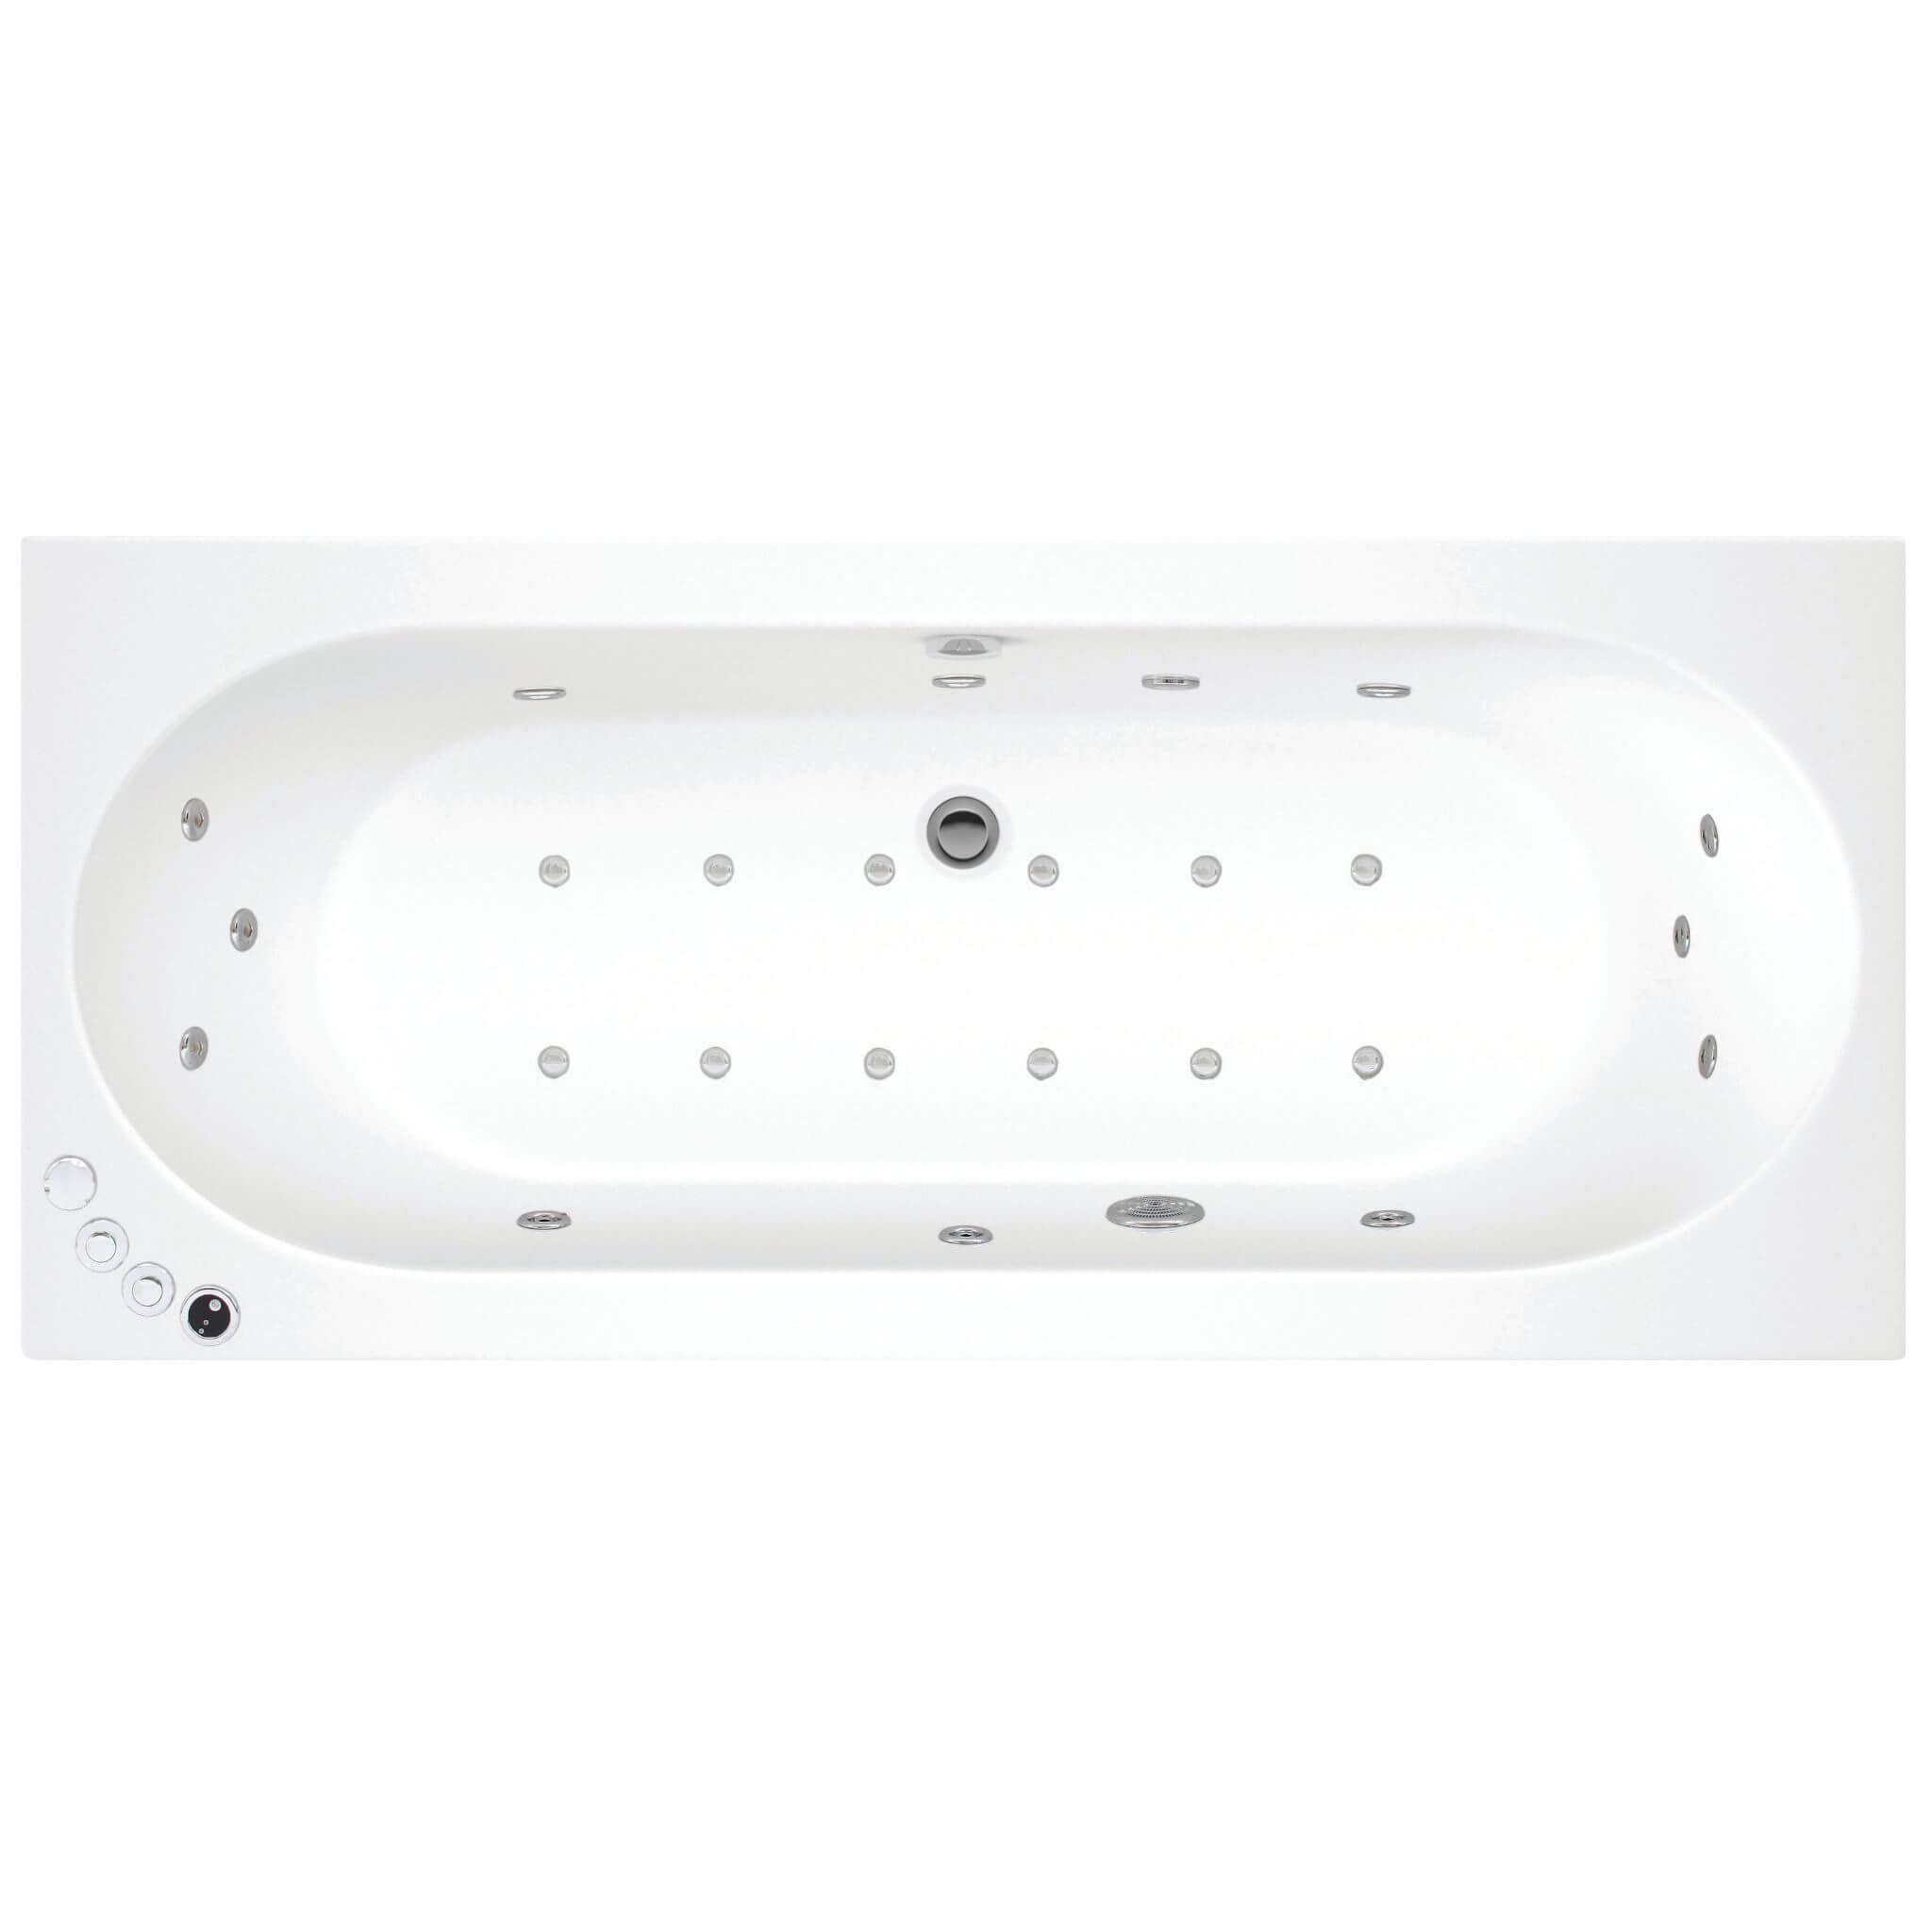 An image of Lisna Waters Maple 1800Mm X 800Mm Double Ended Whirlpool Bath & Air Spa Bath 24 ...